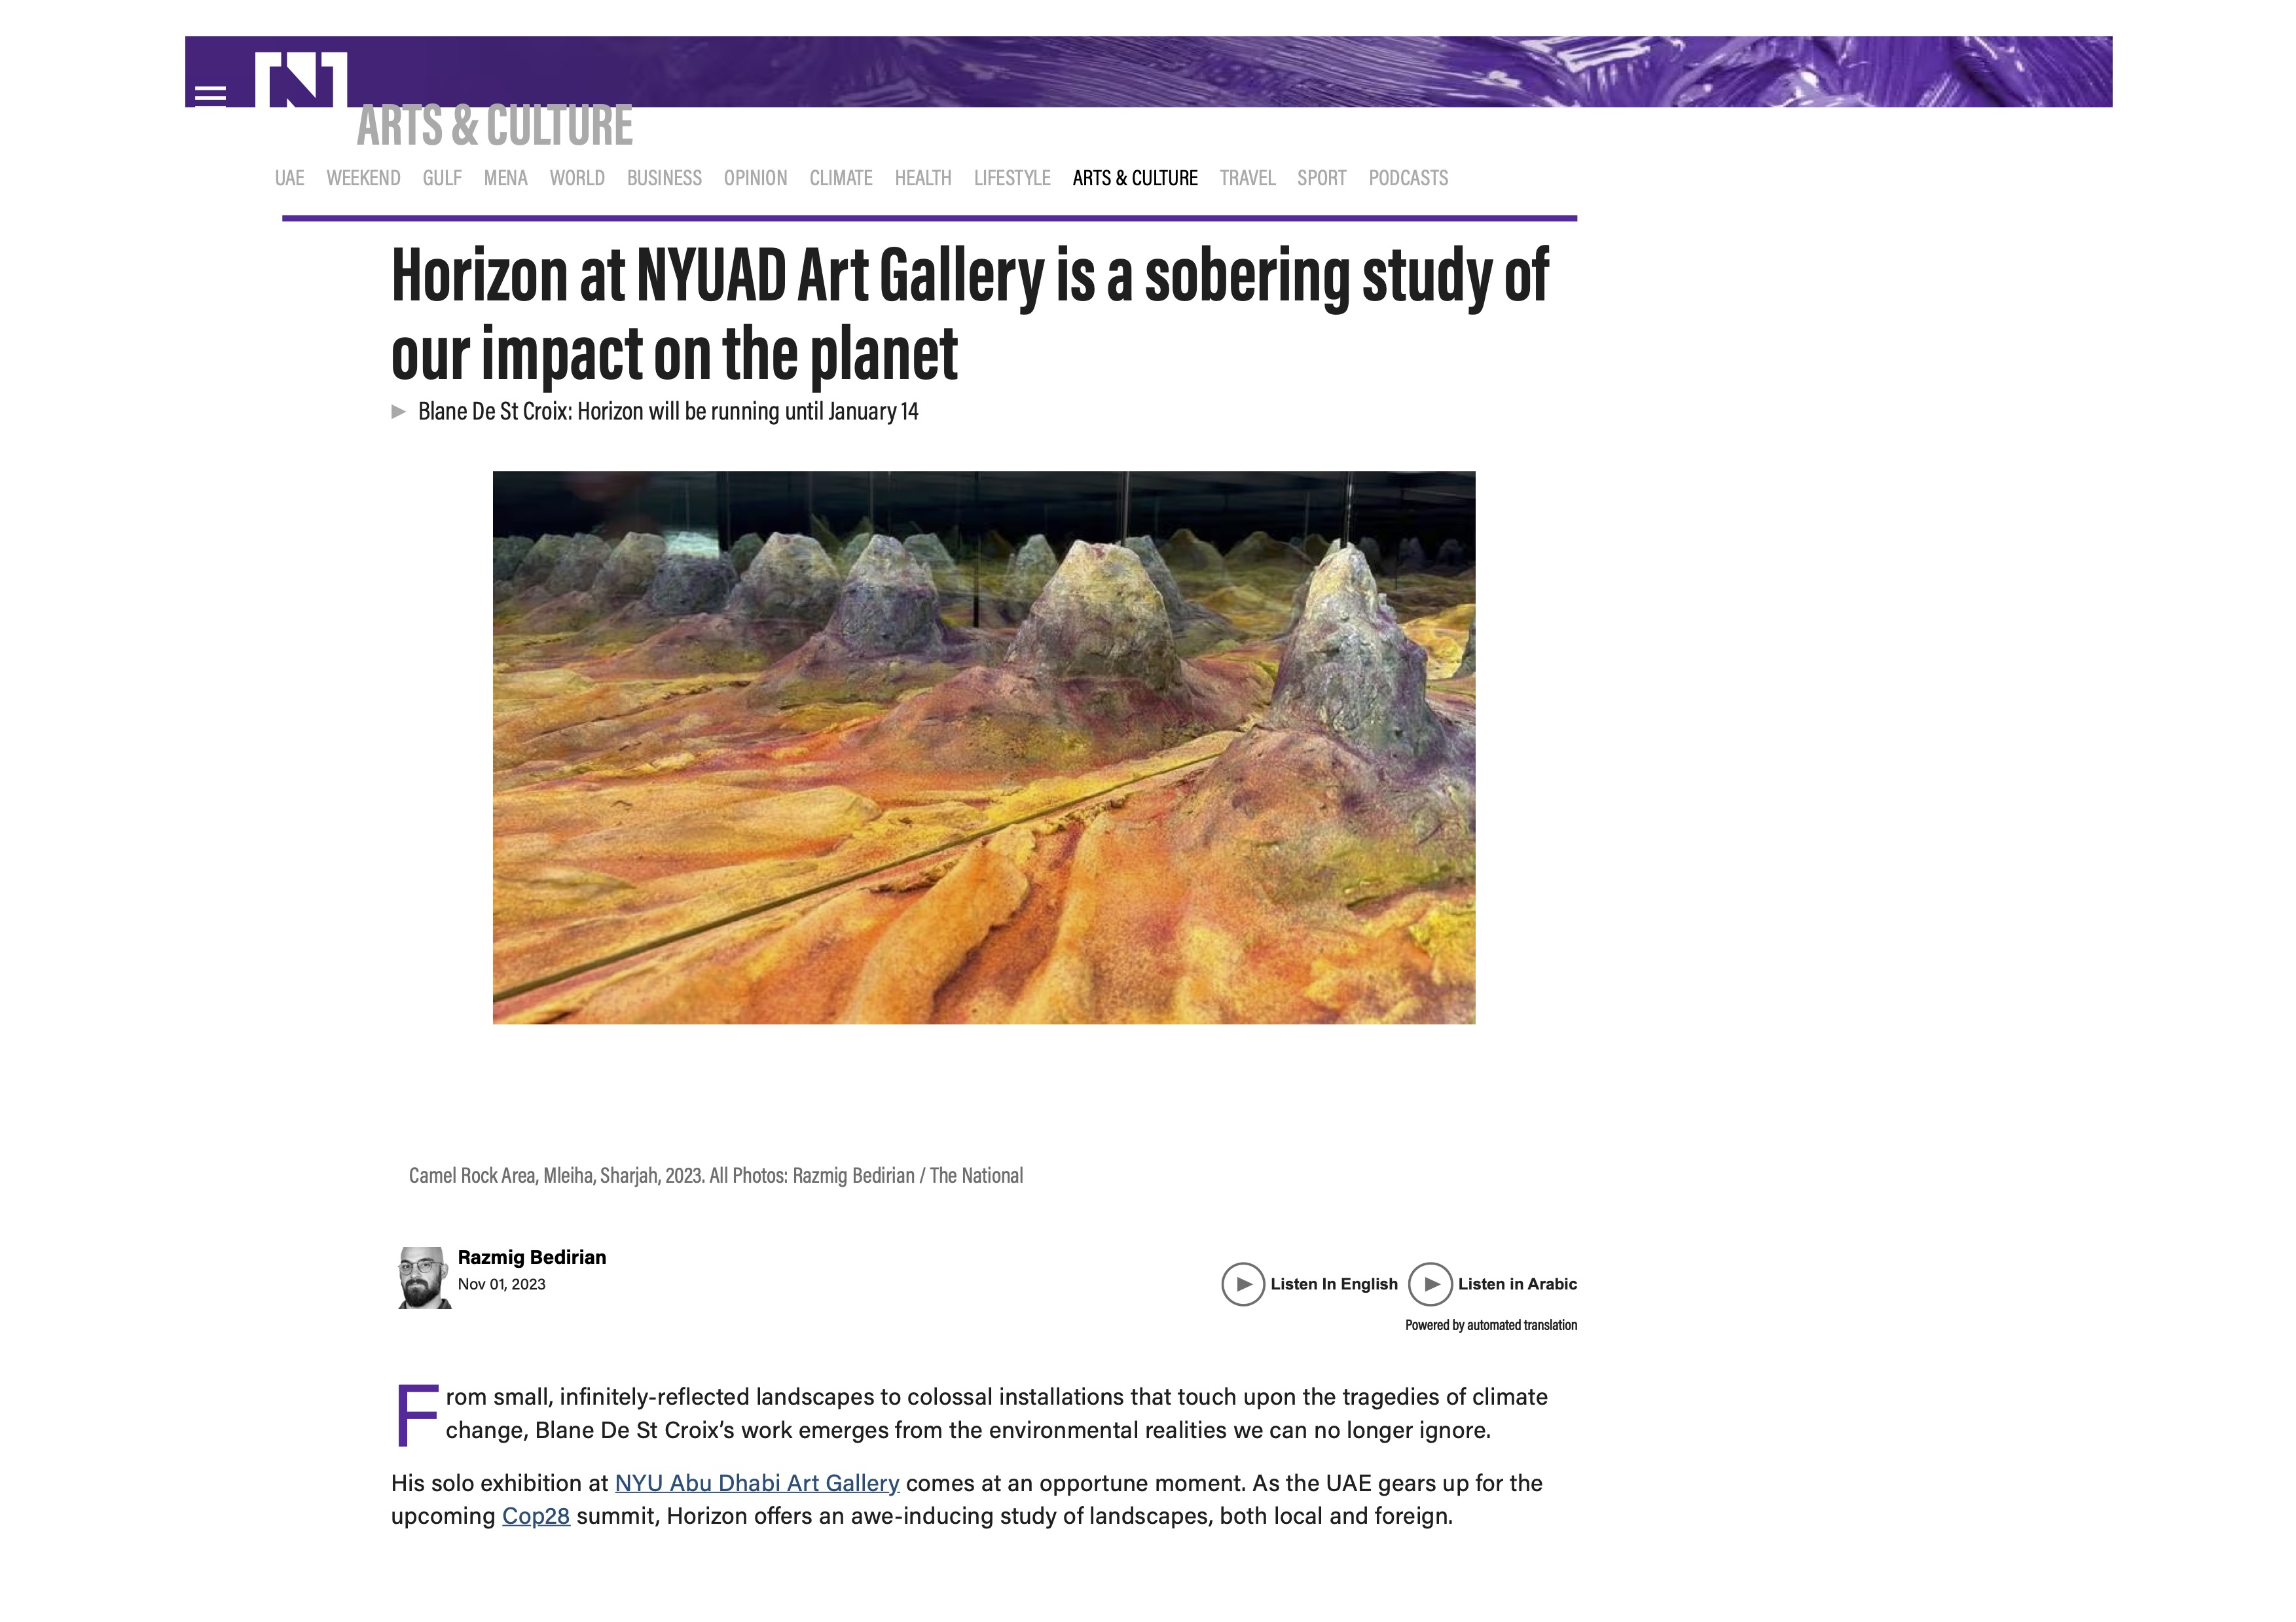 Horizon at NYUAD Art Gallery is a sobering study of our impact on the planet